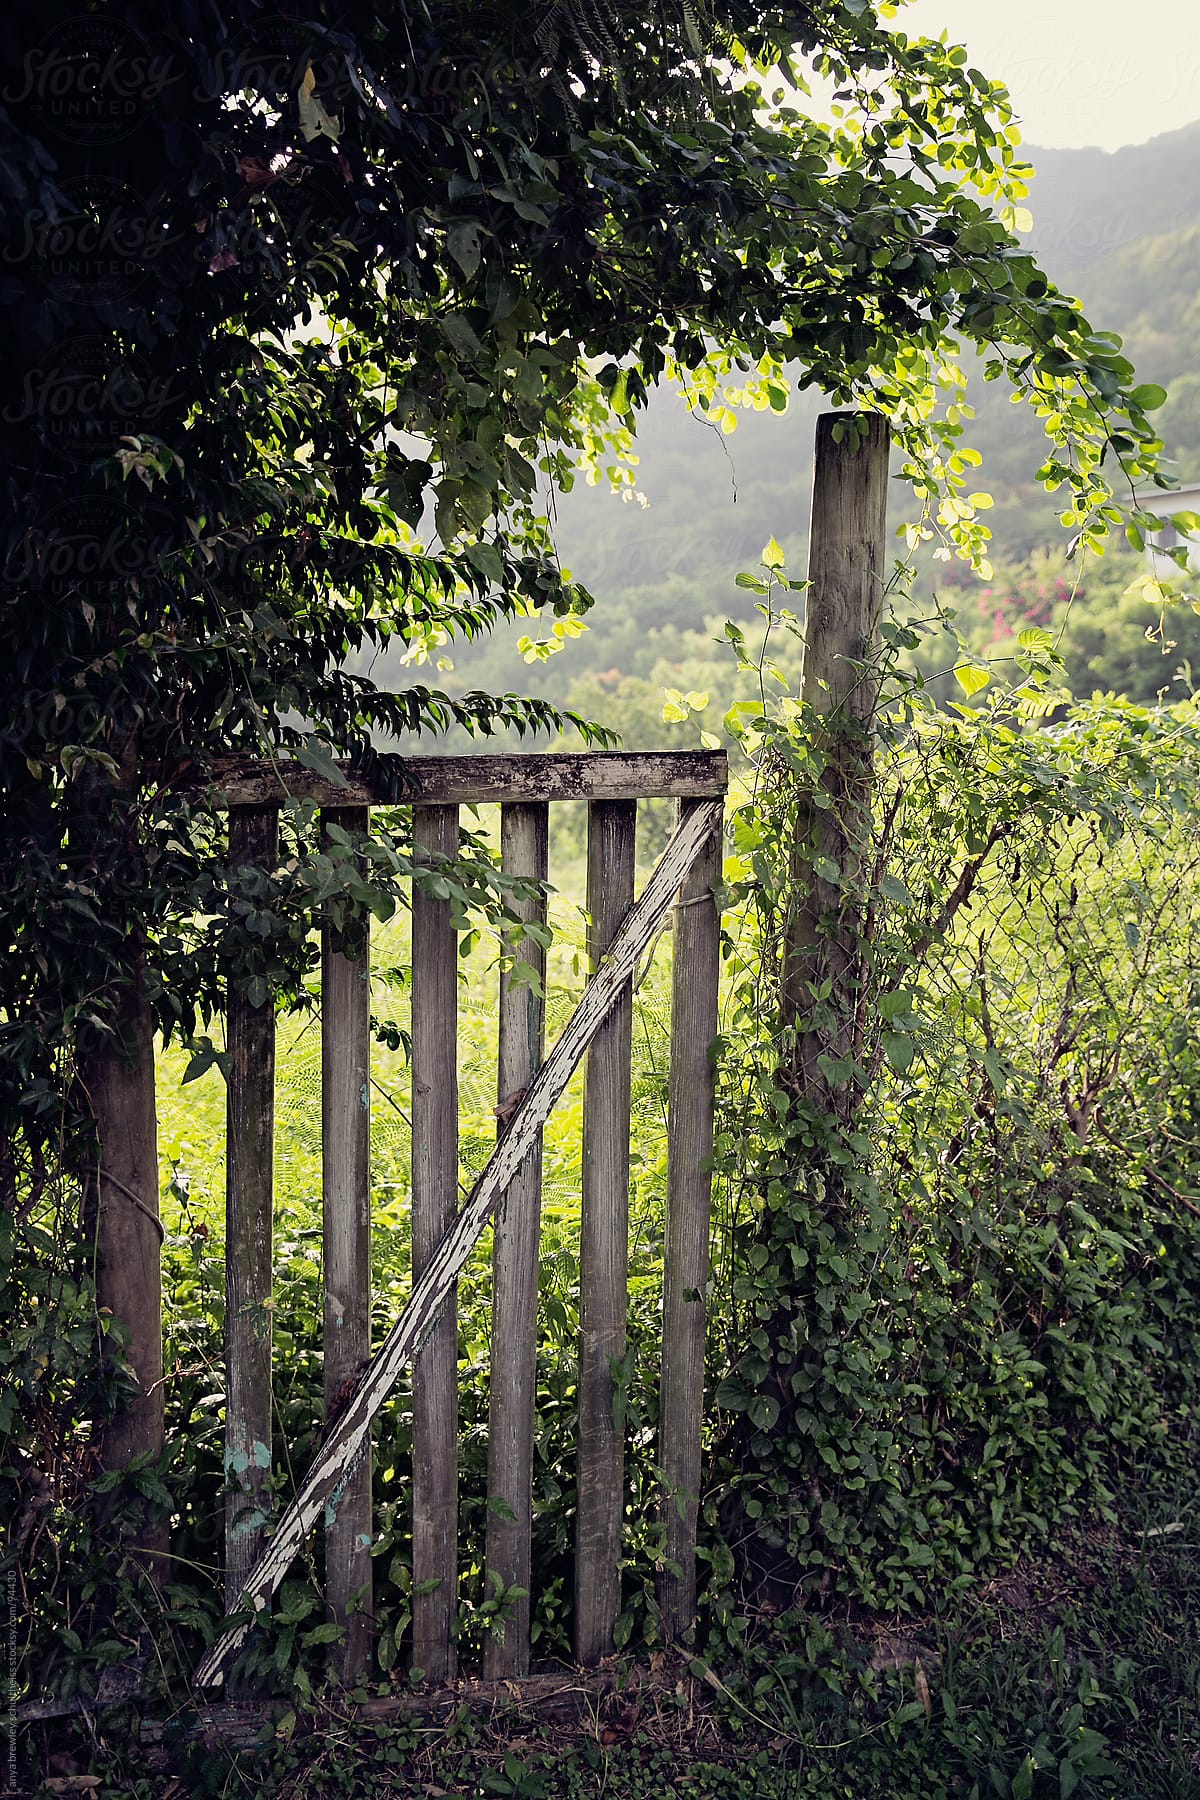 Old wooden gate and fence surrounded by bushes